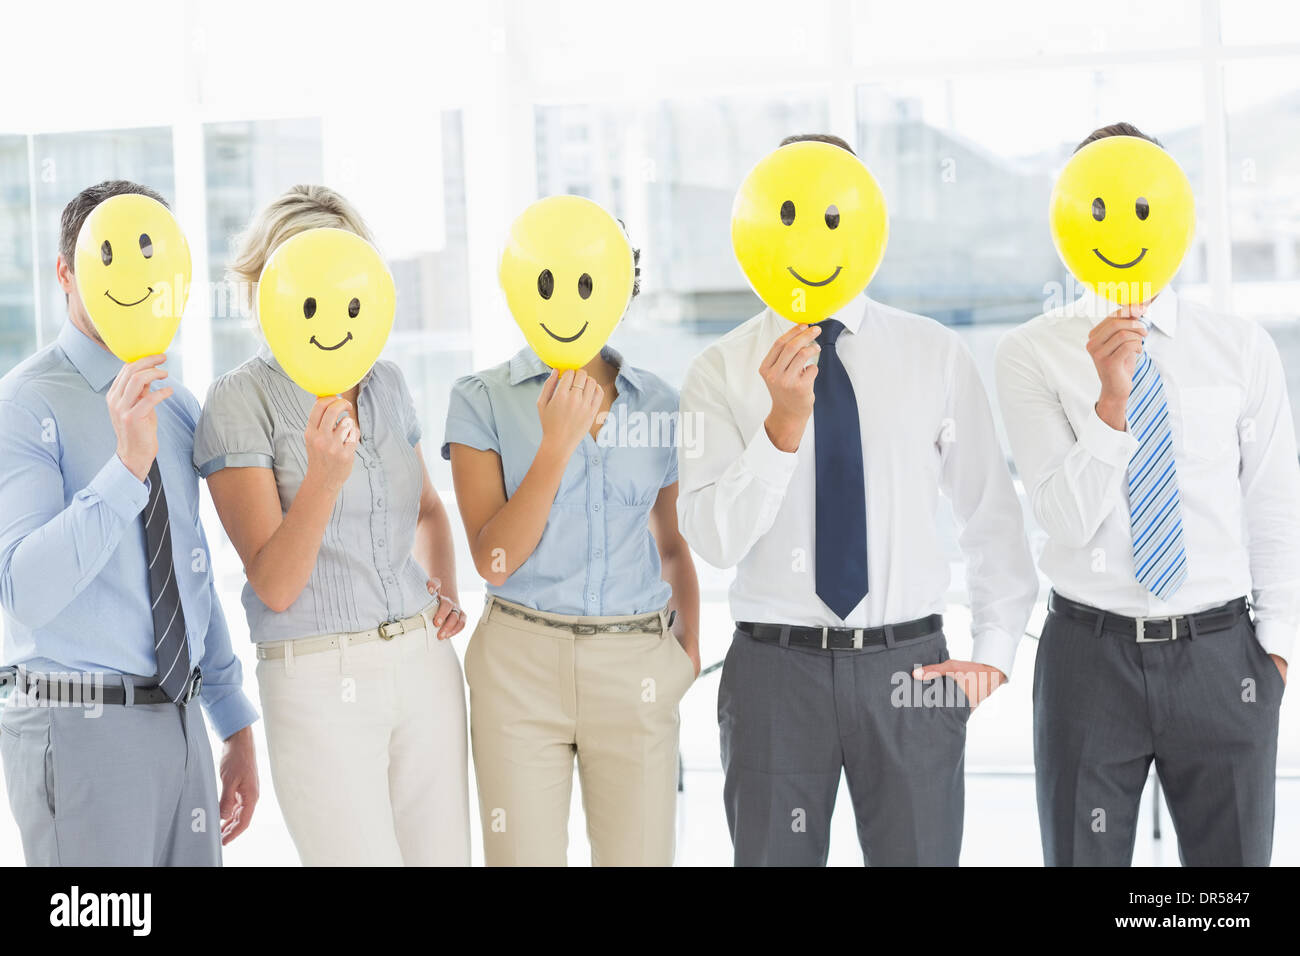 Business people holding happy smiles in front of faces Stock Photo